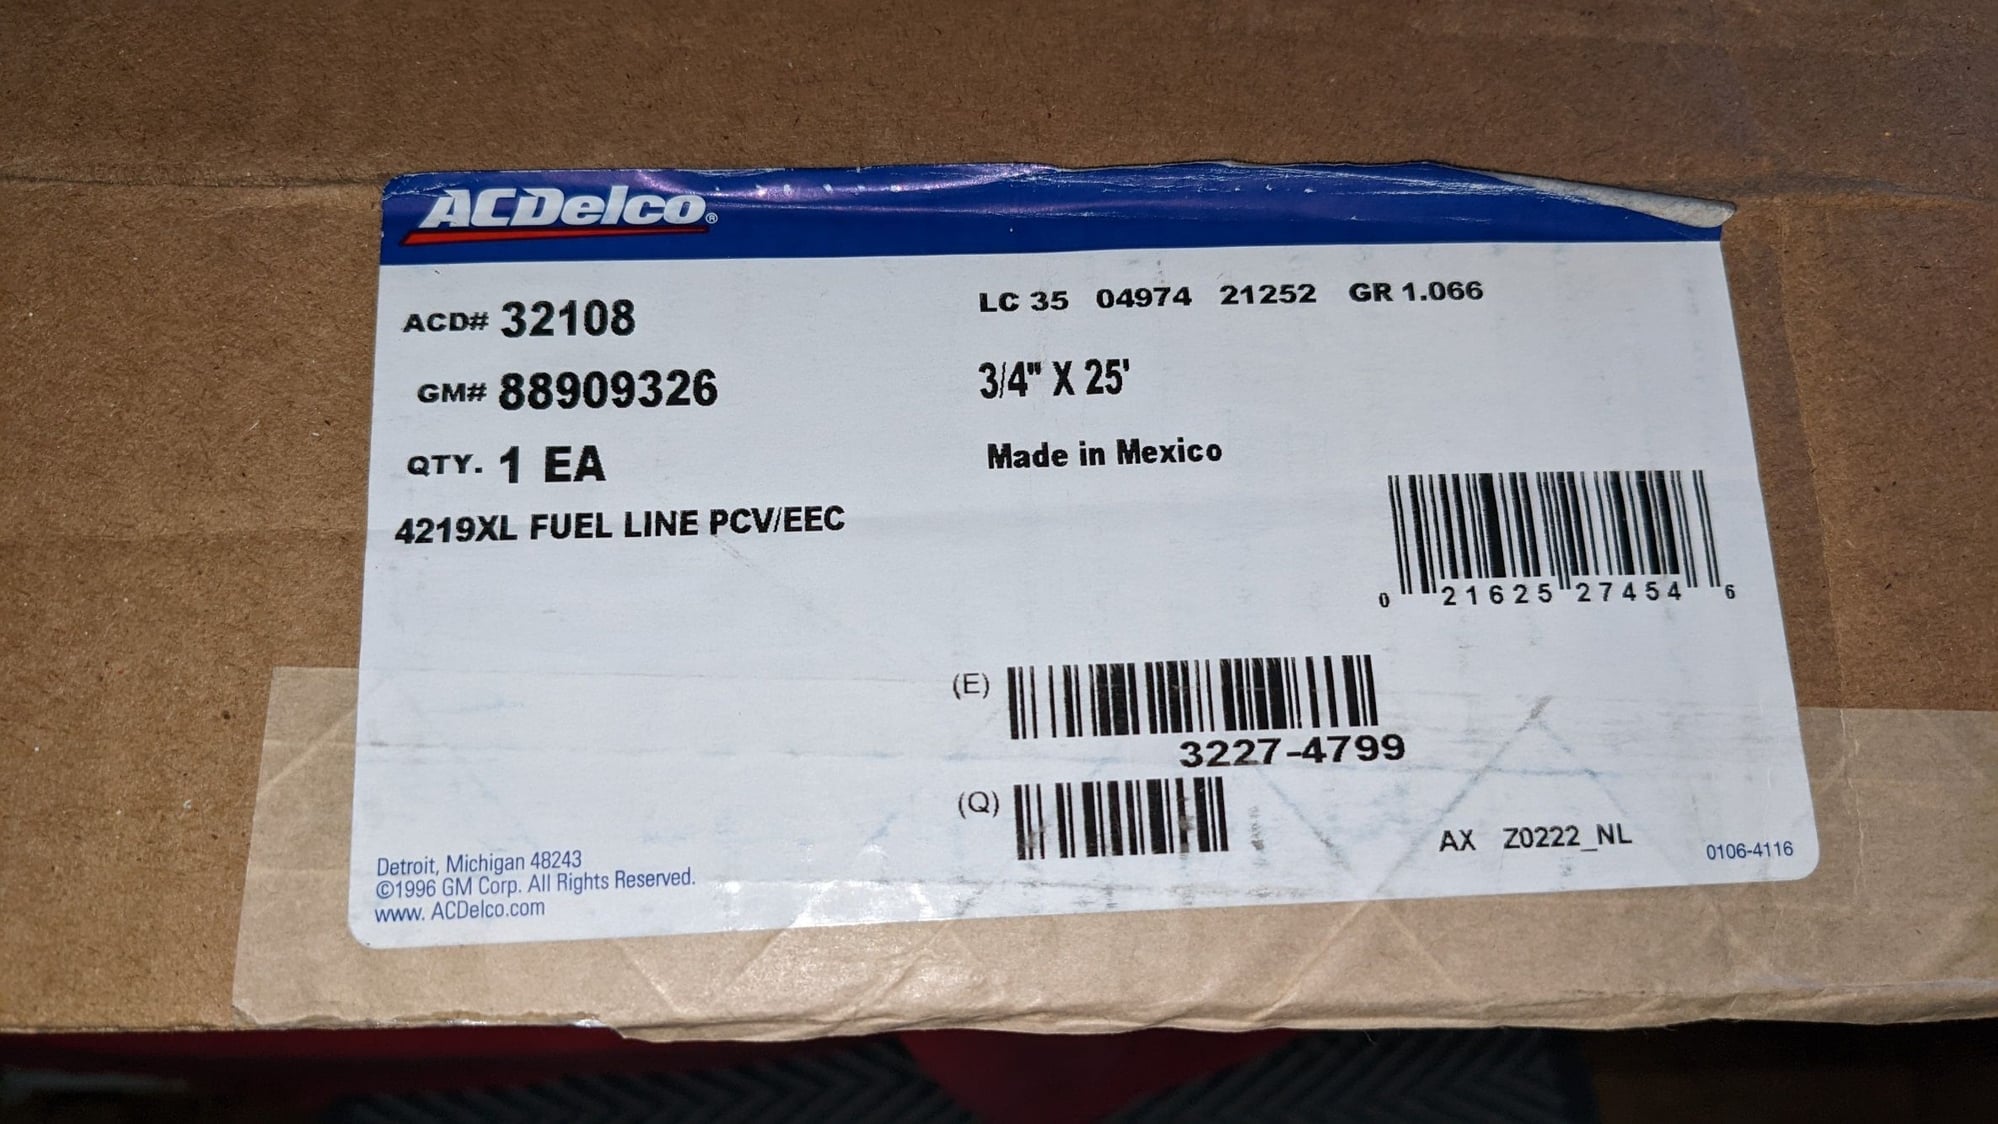  ACDelco Professional 32108 25 ft Bulk Reel of 3/4 in Fuel Line/PCV/EEC  Hose : Automotive